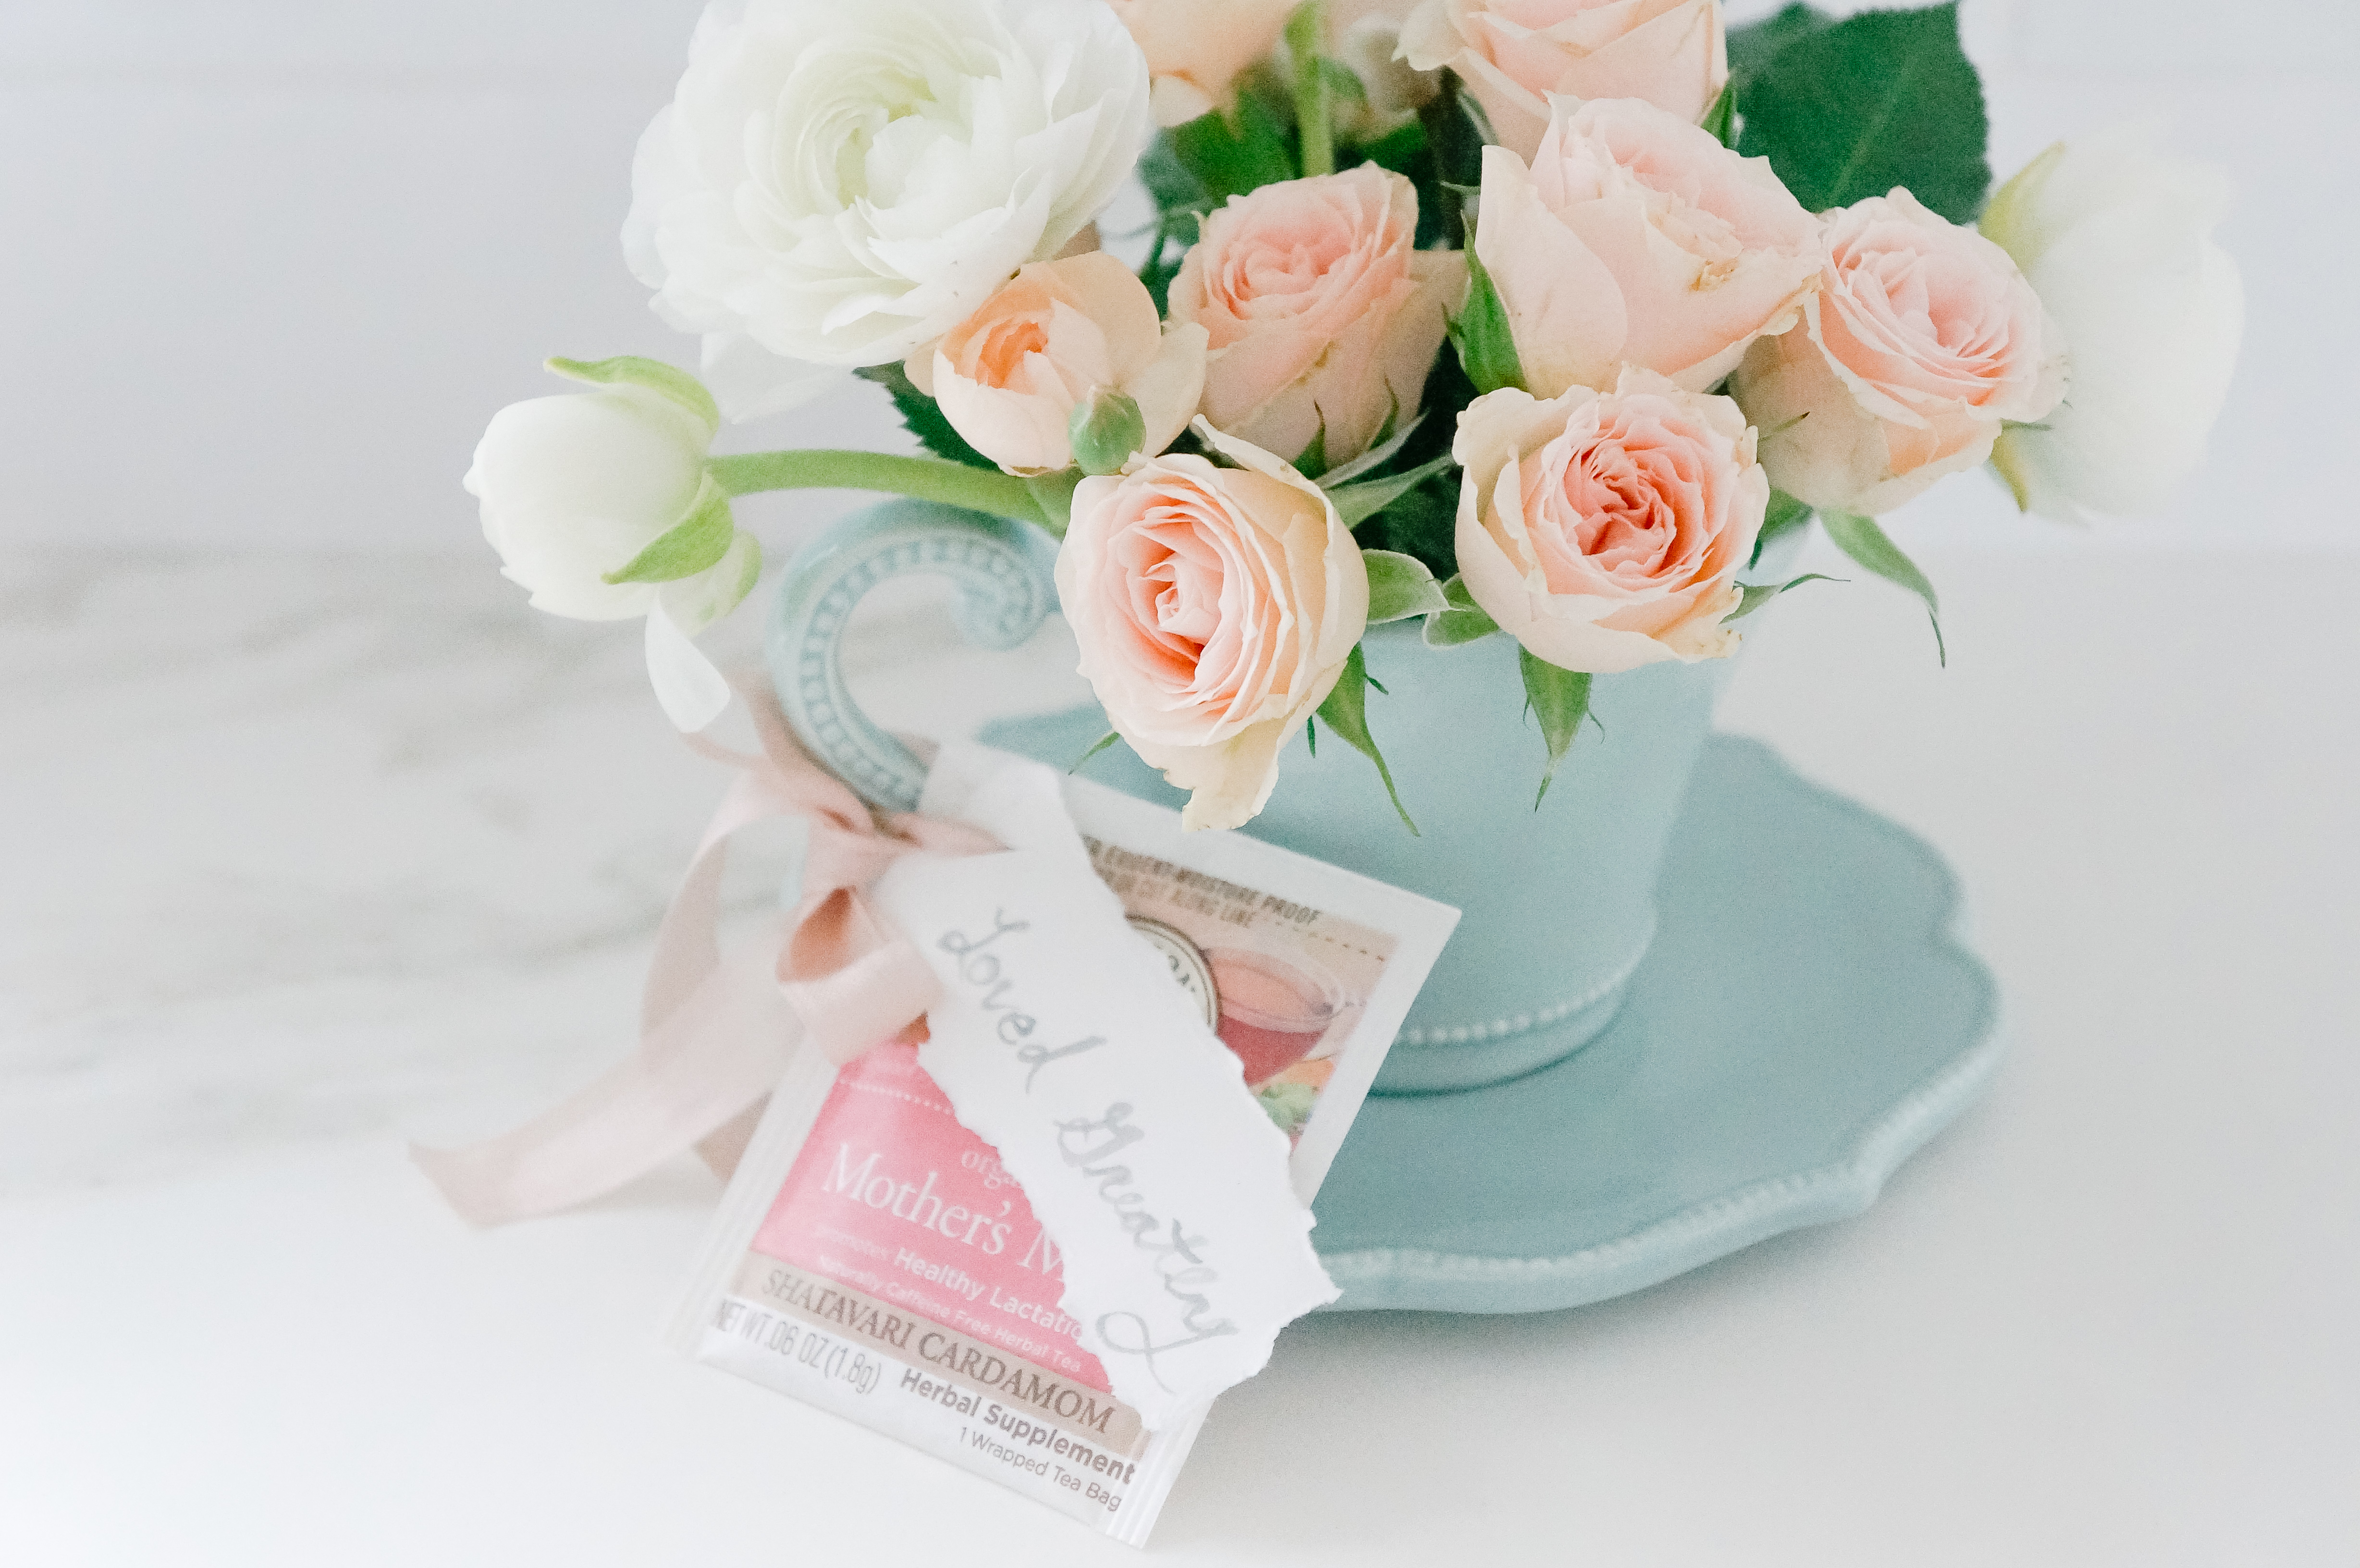 Beautiful Teacups for a Tea Party - Happy Happy Nester